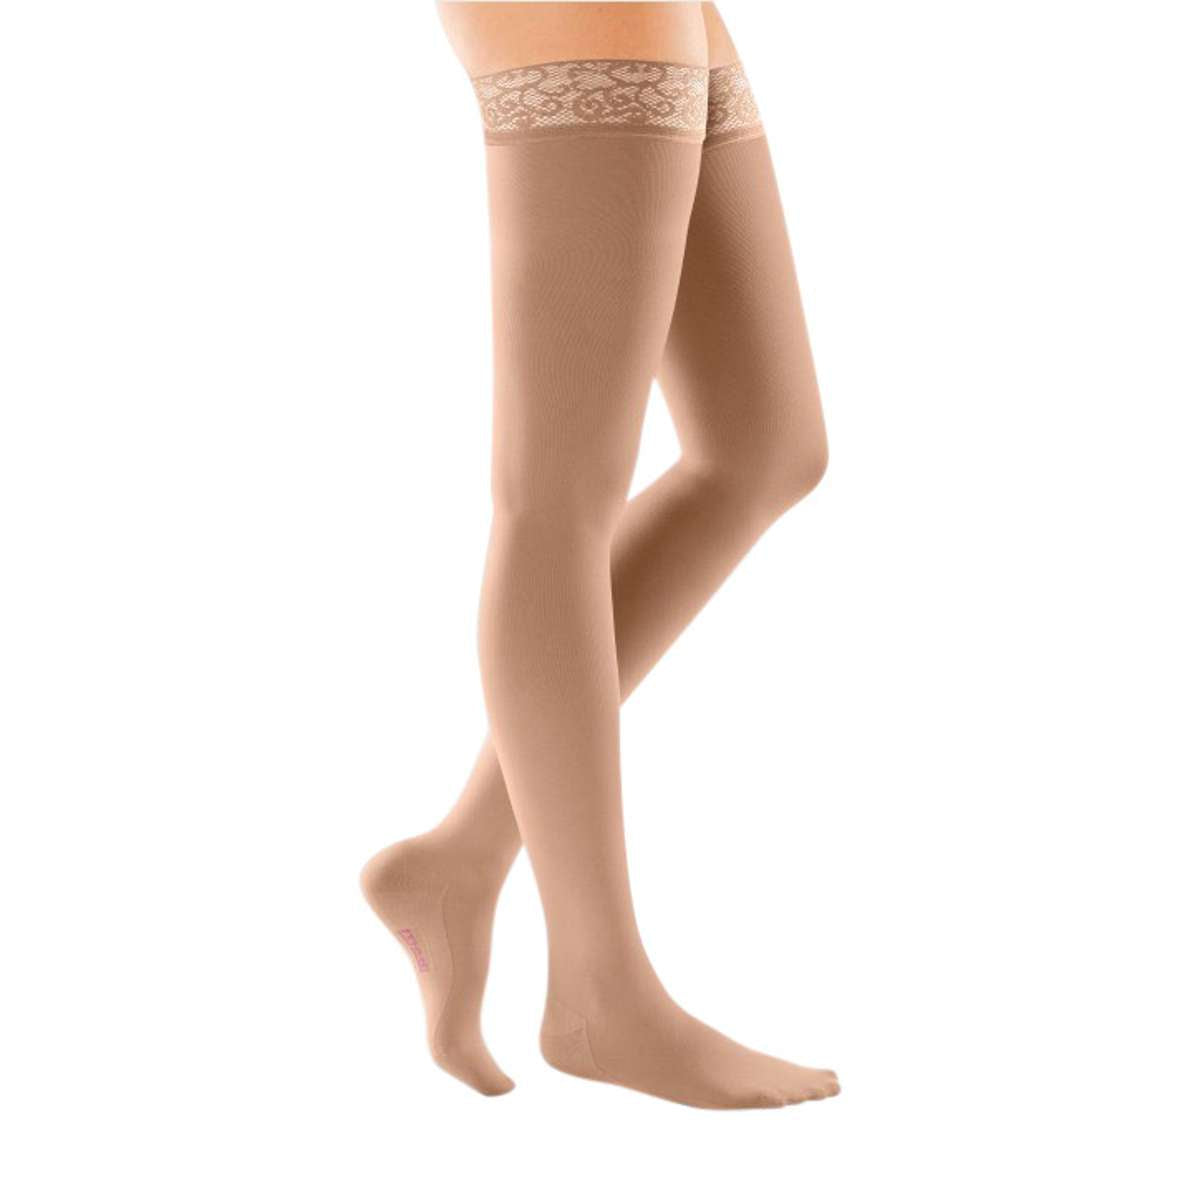 mediven comfort 20-30 mmHg thigh lace topband closed toe petite